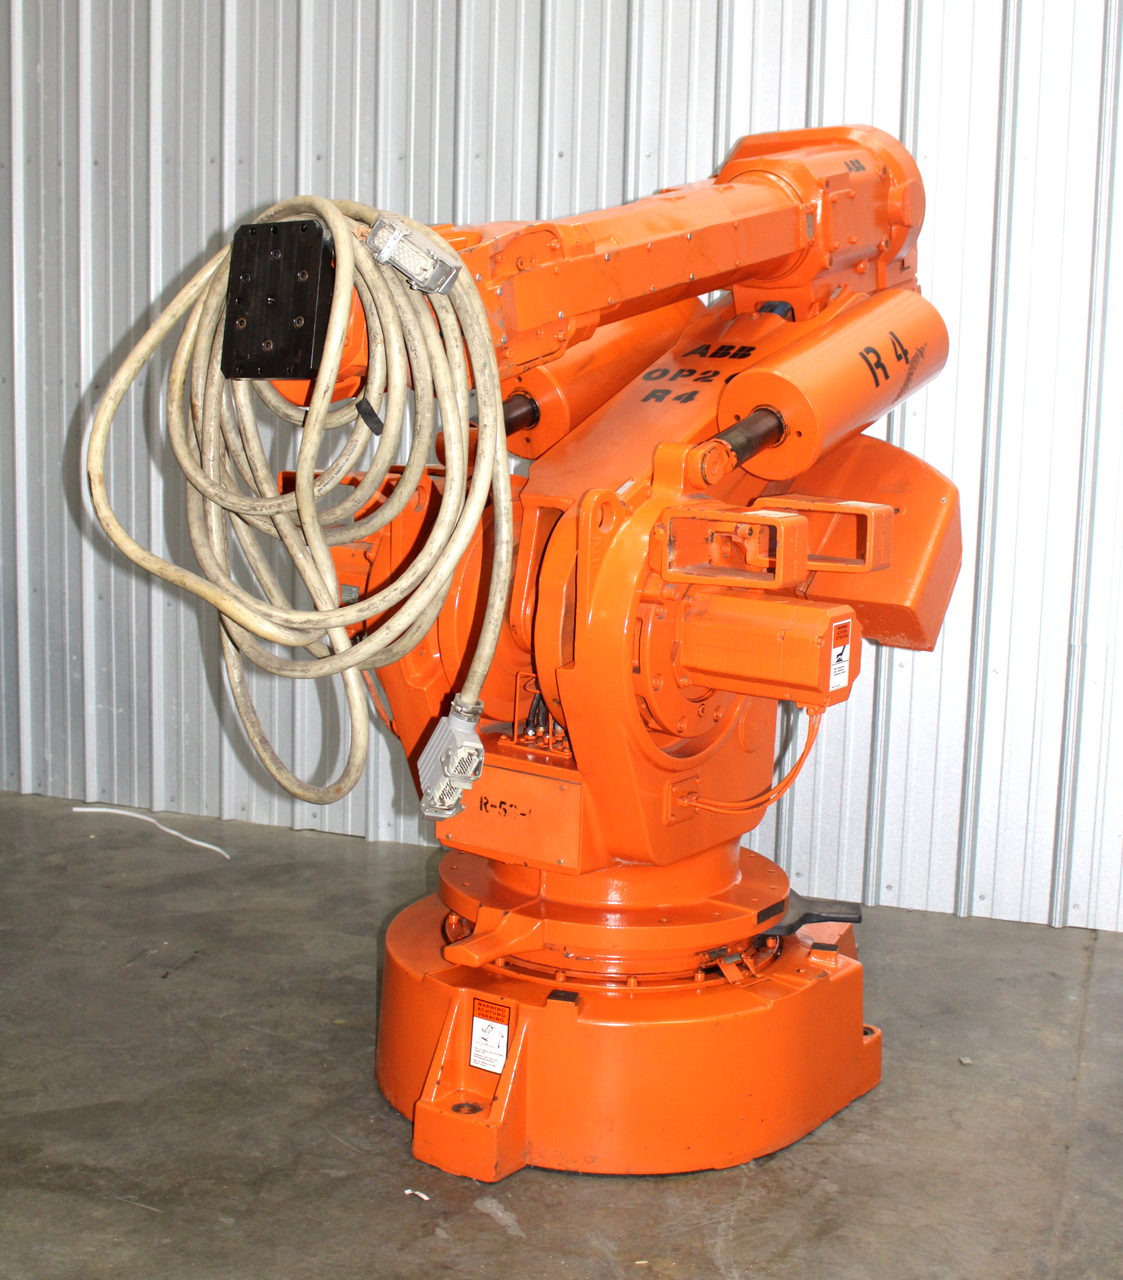 ABB IRB 6400 /2.4m Robot 200Kg Payload with S4C M97A Control System Teach Pendant